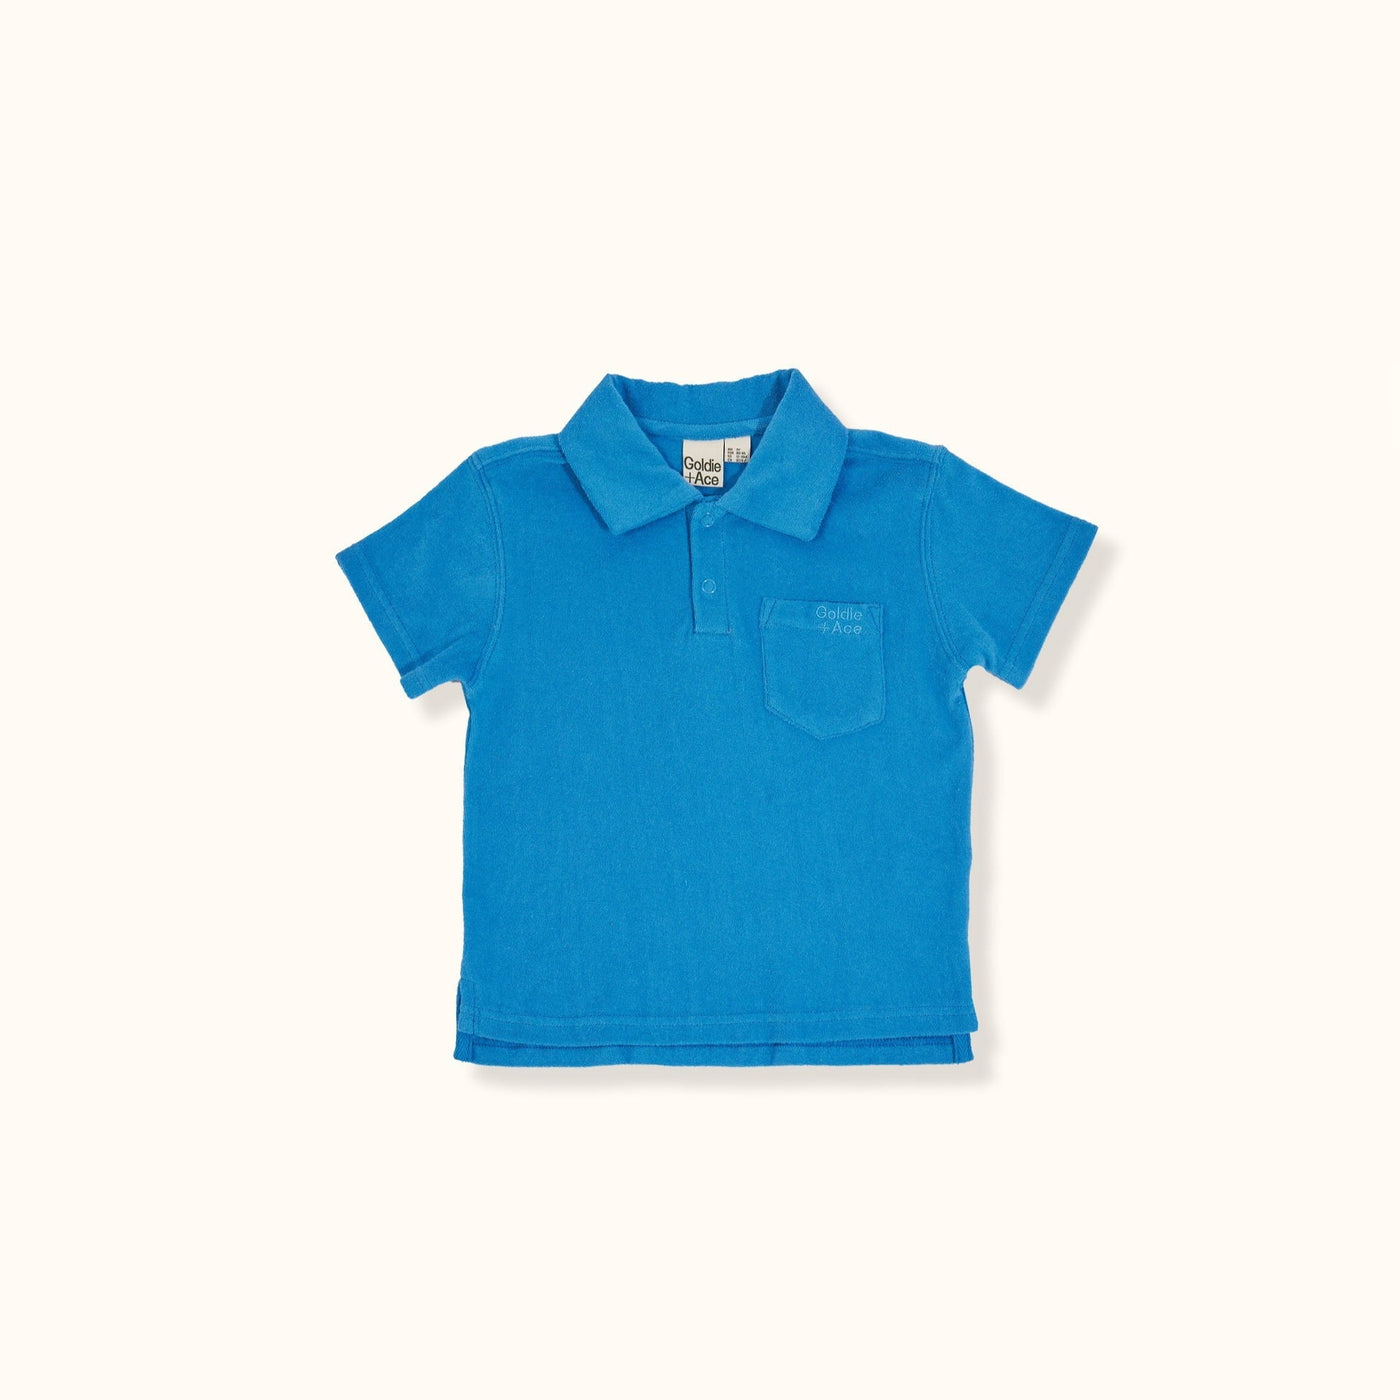 Oasis Terry Towelling Polo Shirt - French Blue Short Sleeve Shirt Goldie & Ace 